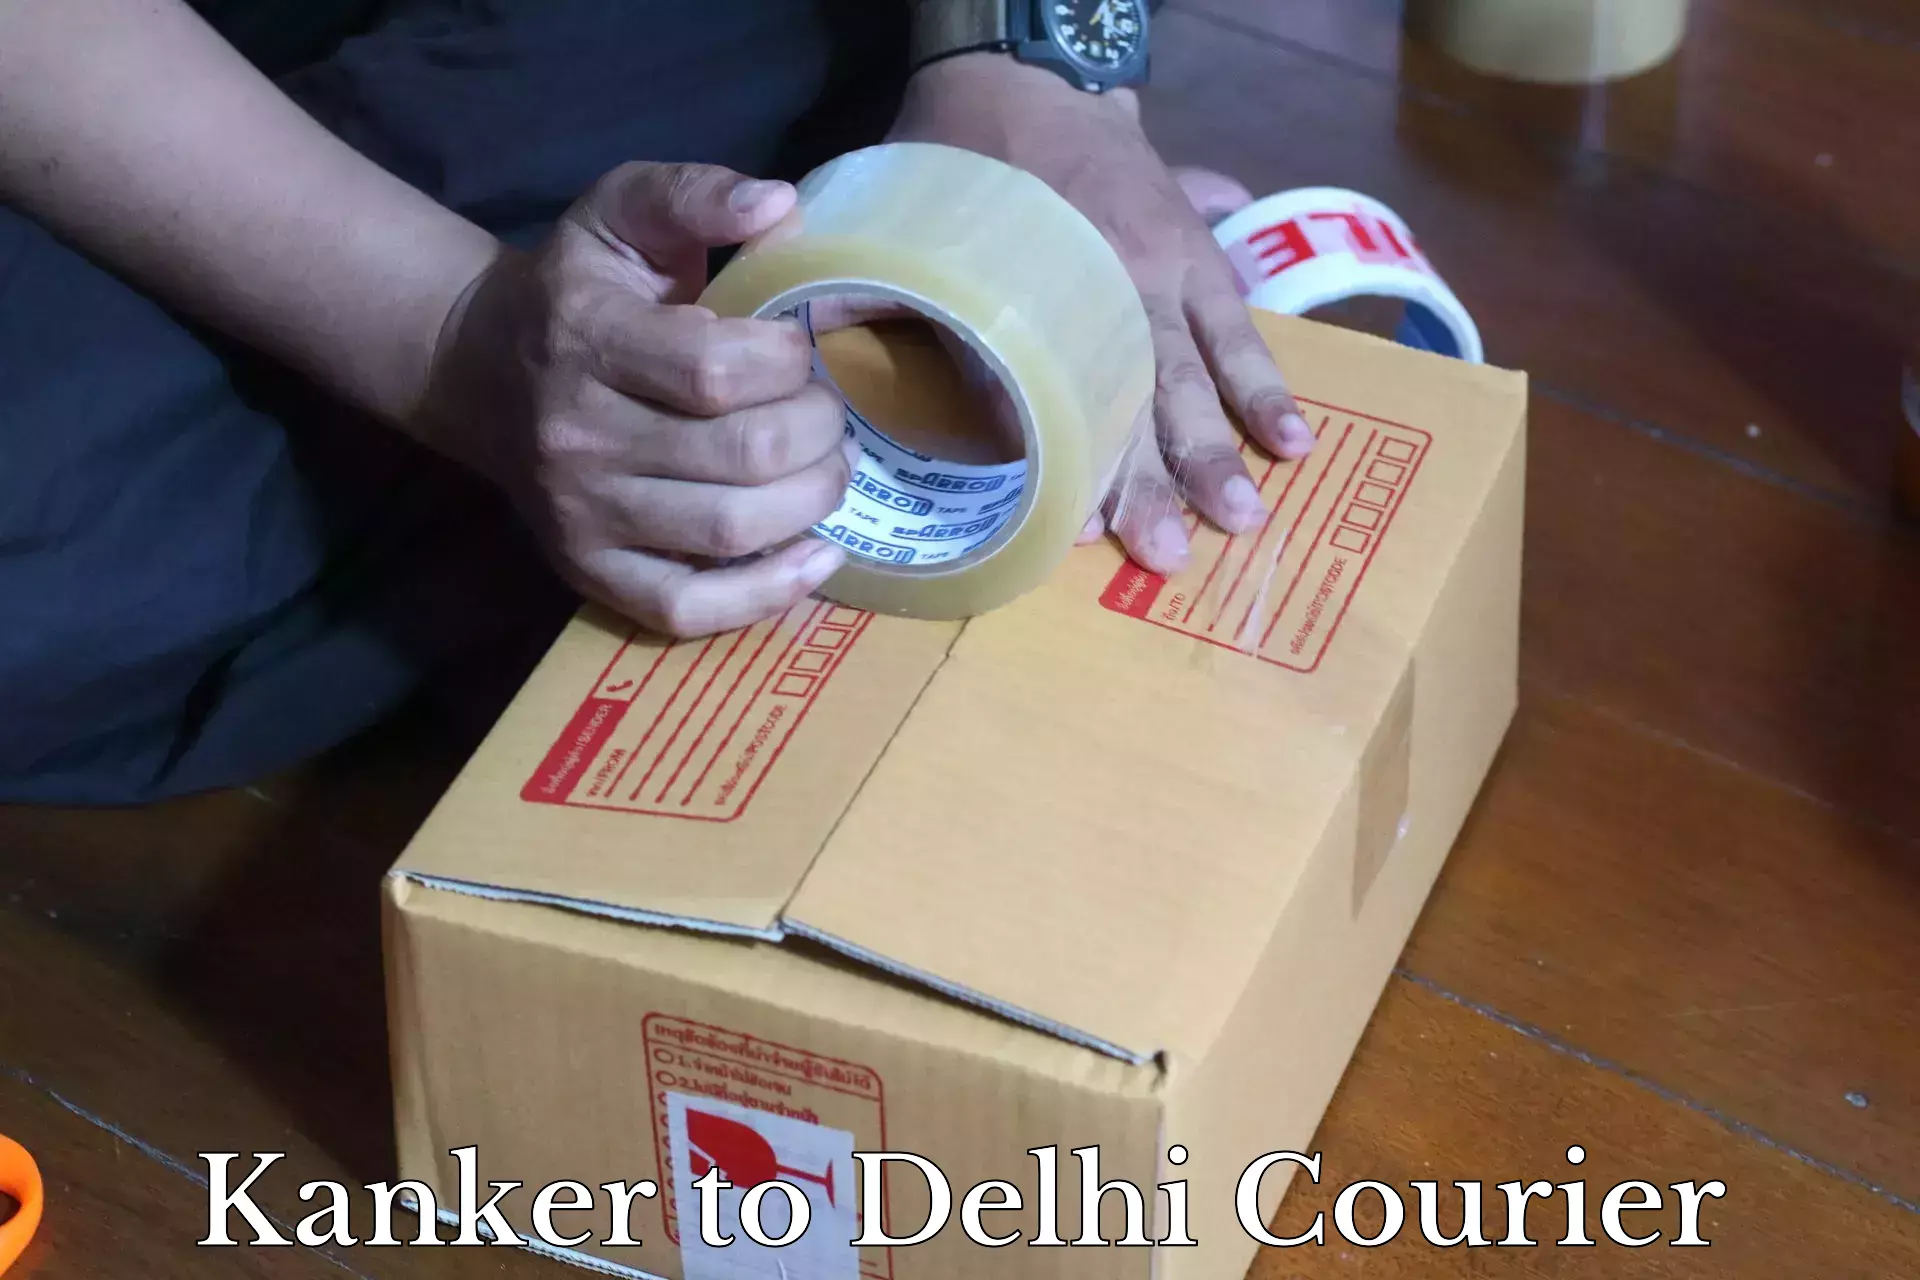 Subscription-based courier Kanker to Lodhi Road